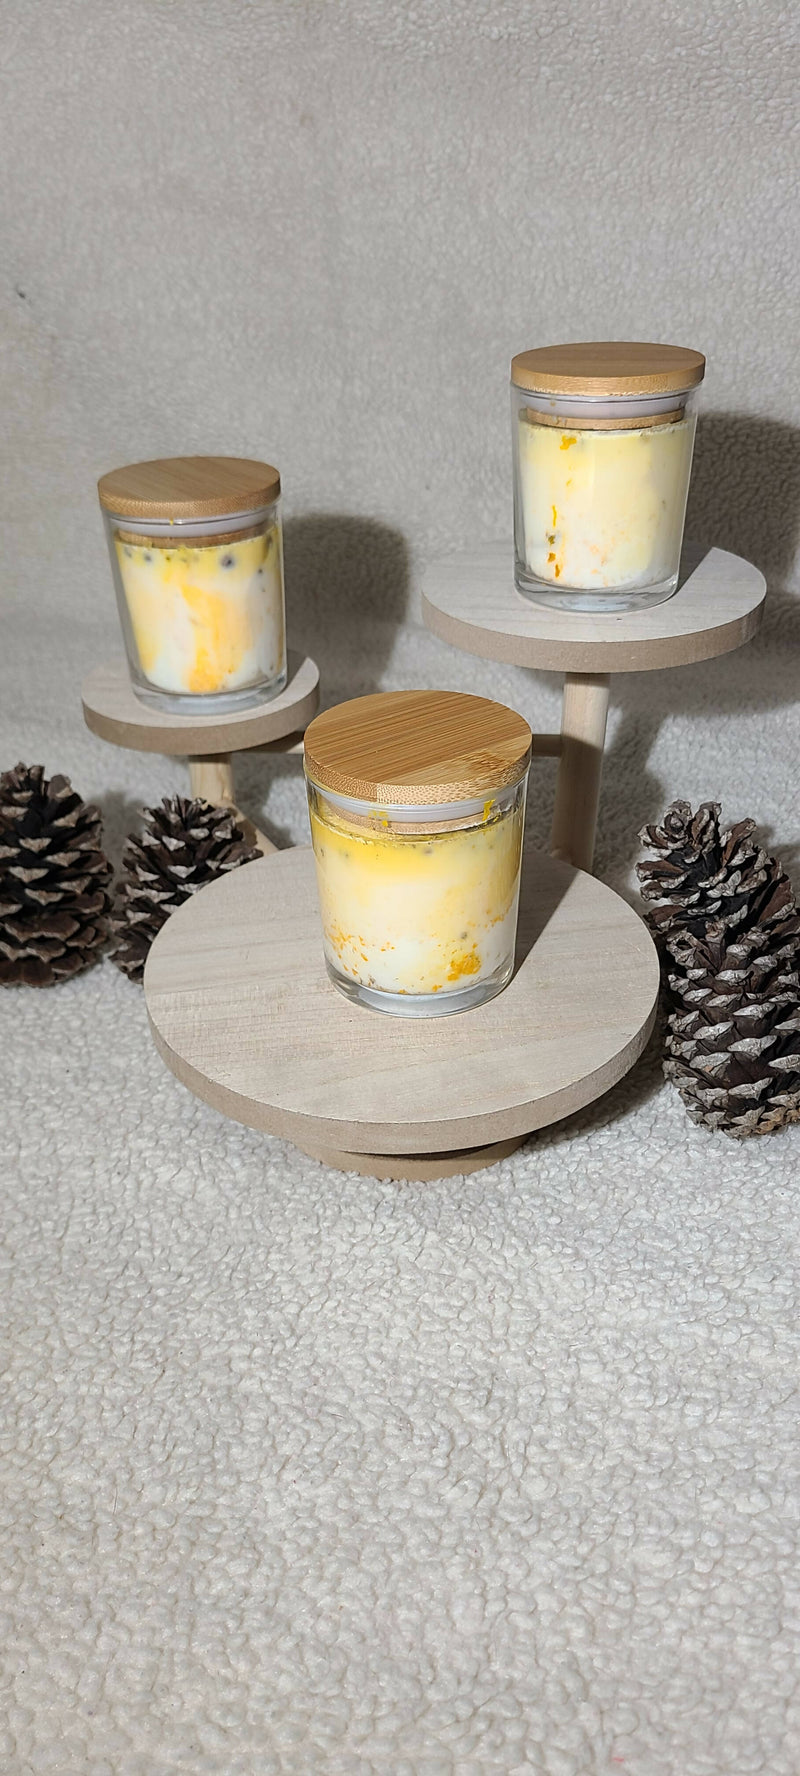 Chamomile and Sandalwood Soy Candle - Create Your Own Label and Make It Special